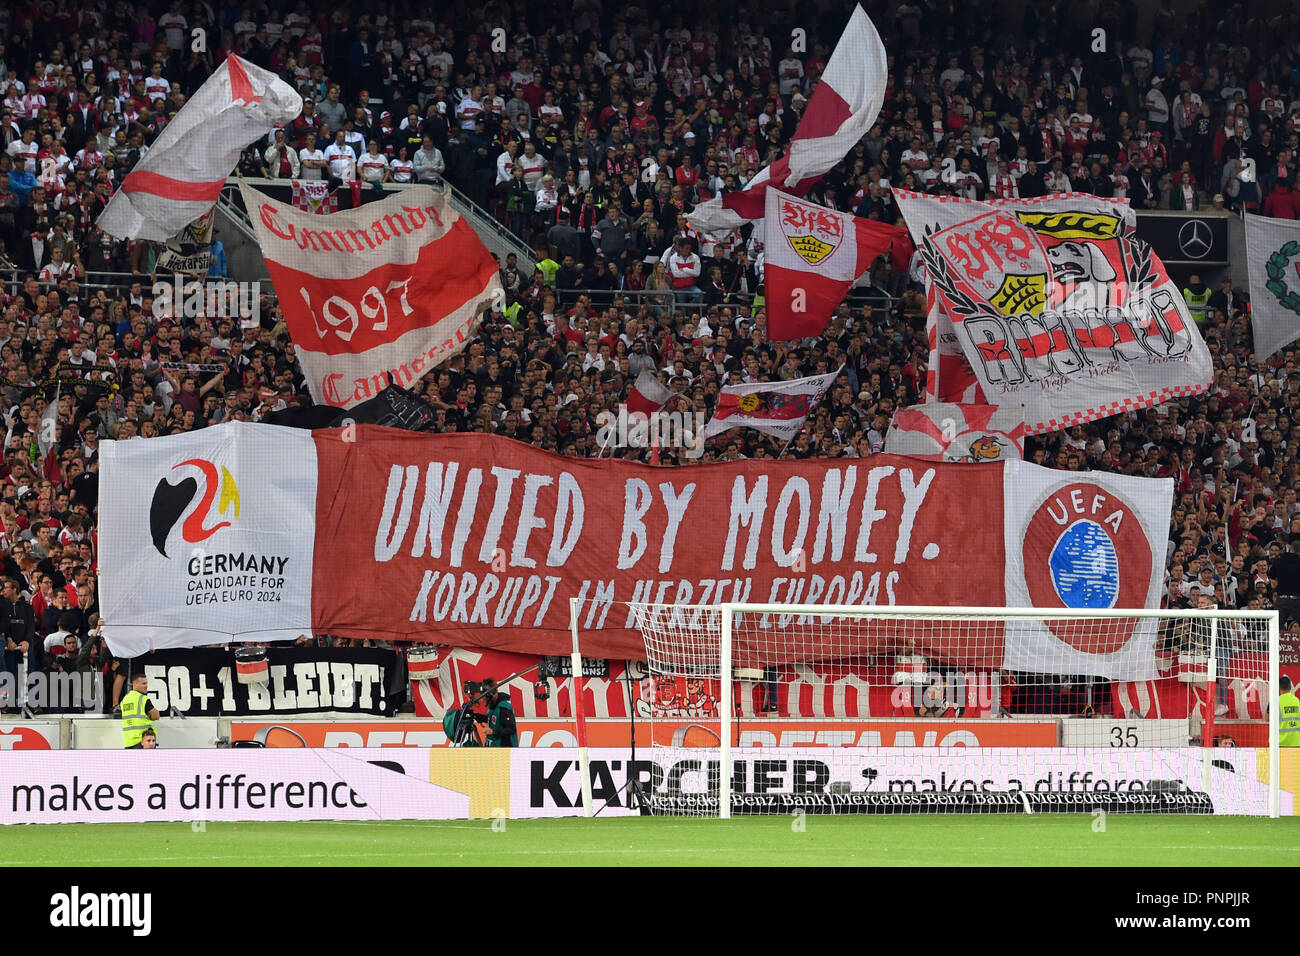 Stuttgart, Germany. 22nd Sept 2018. UNITED BY MONEY! CORRUP IN THE HEART OF  EUROPE. Fans of Stuttgart, football fans, Ultras demonstrate with a banner,  Transparent versus the DFB and the application for